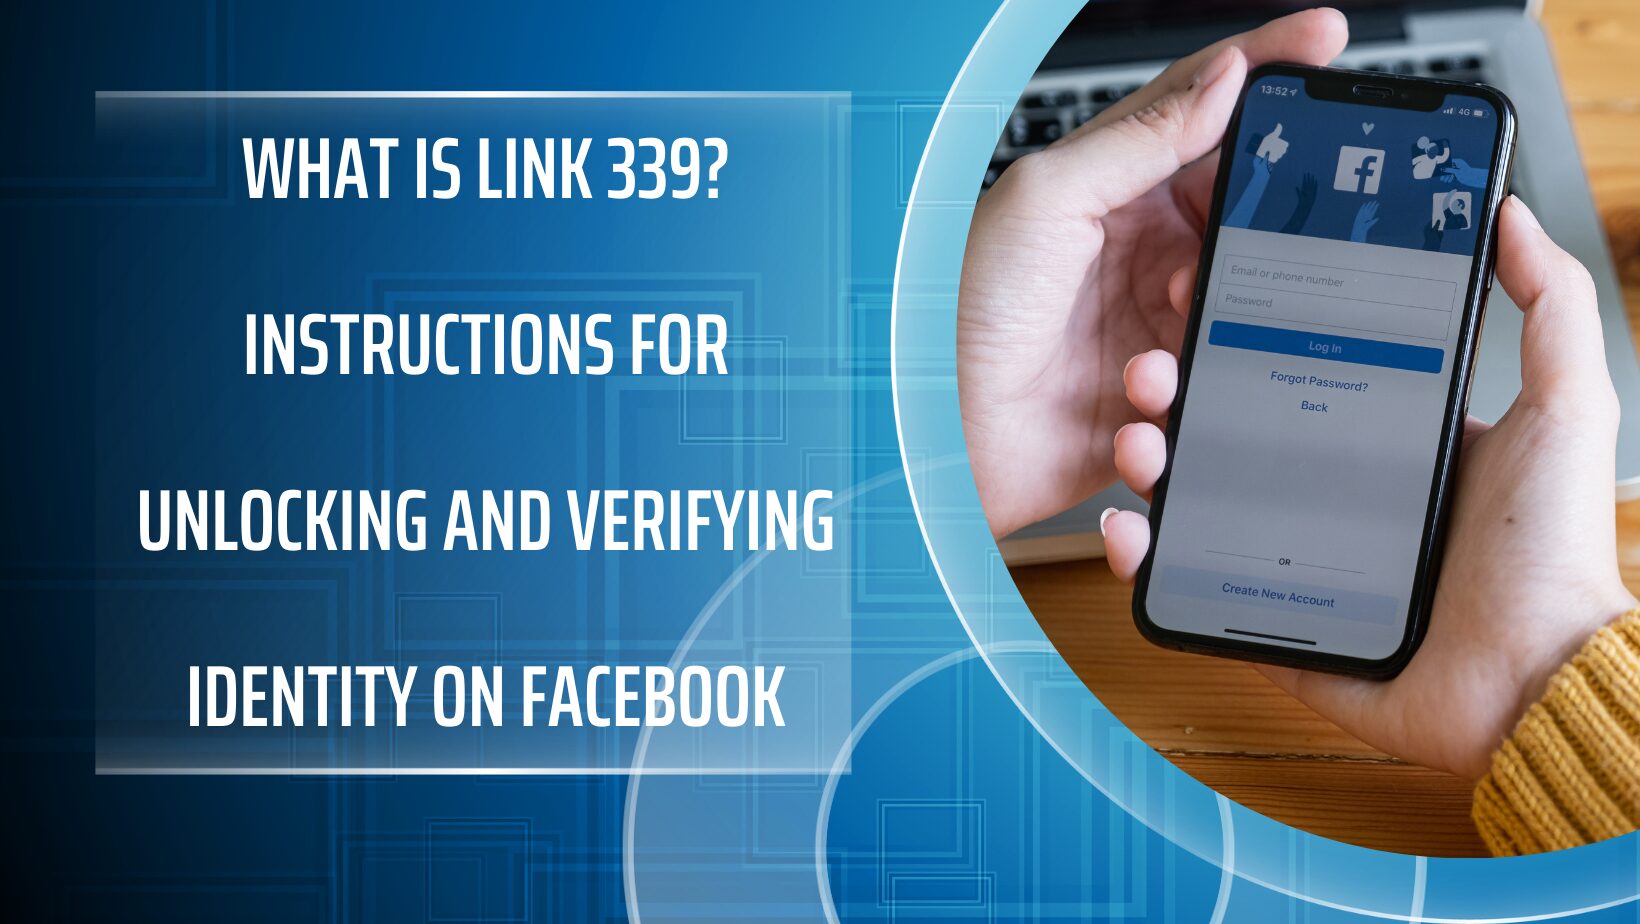 What is Link 339? Instructions for unlocking and verifying identity on Facebook